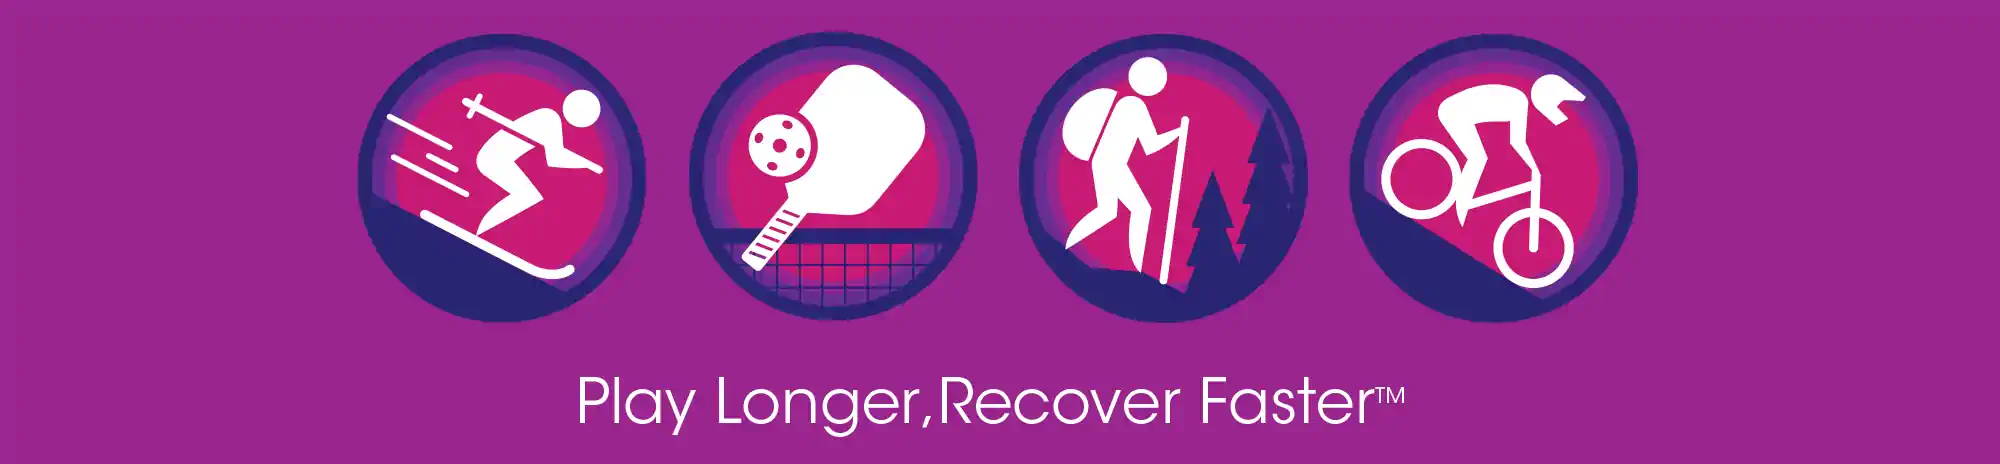 Play Longer, Recover Faster